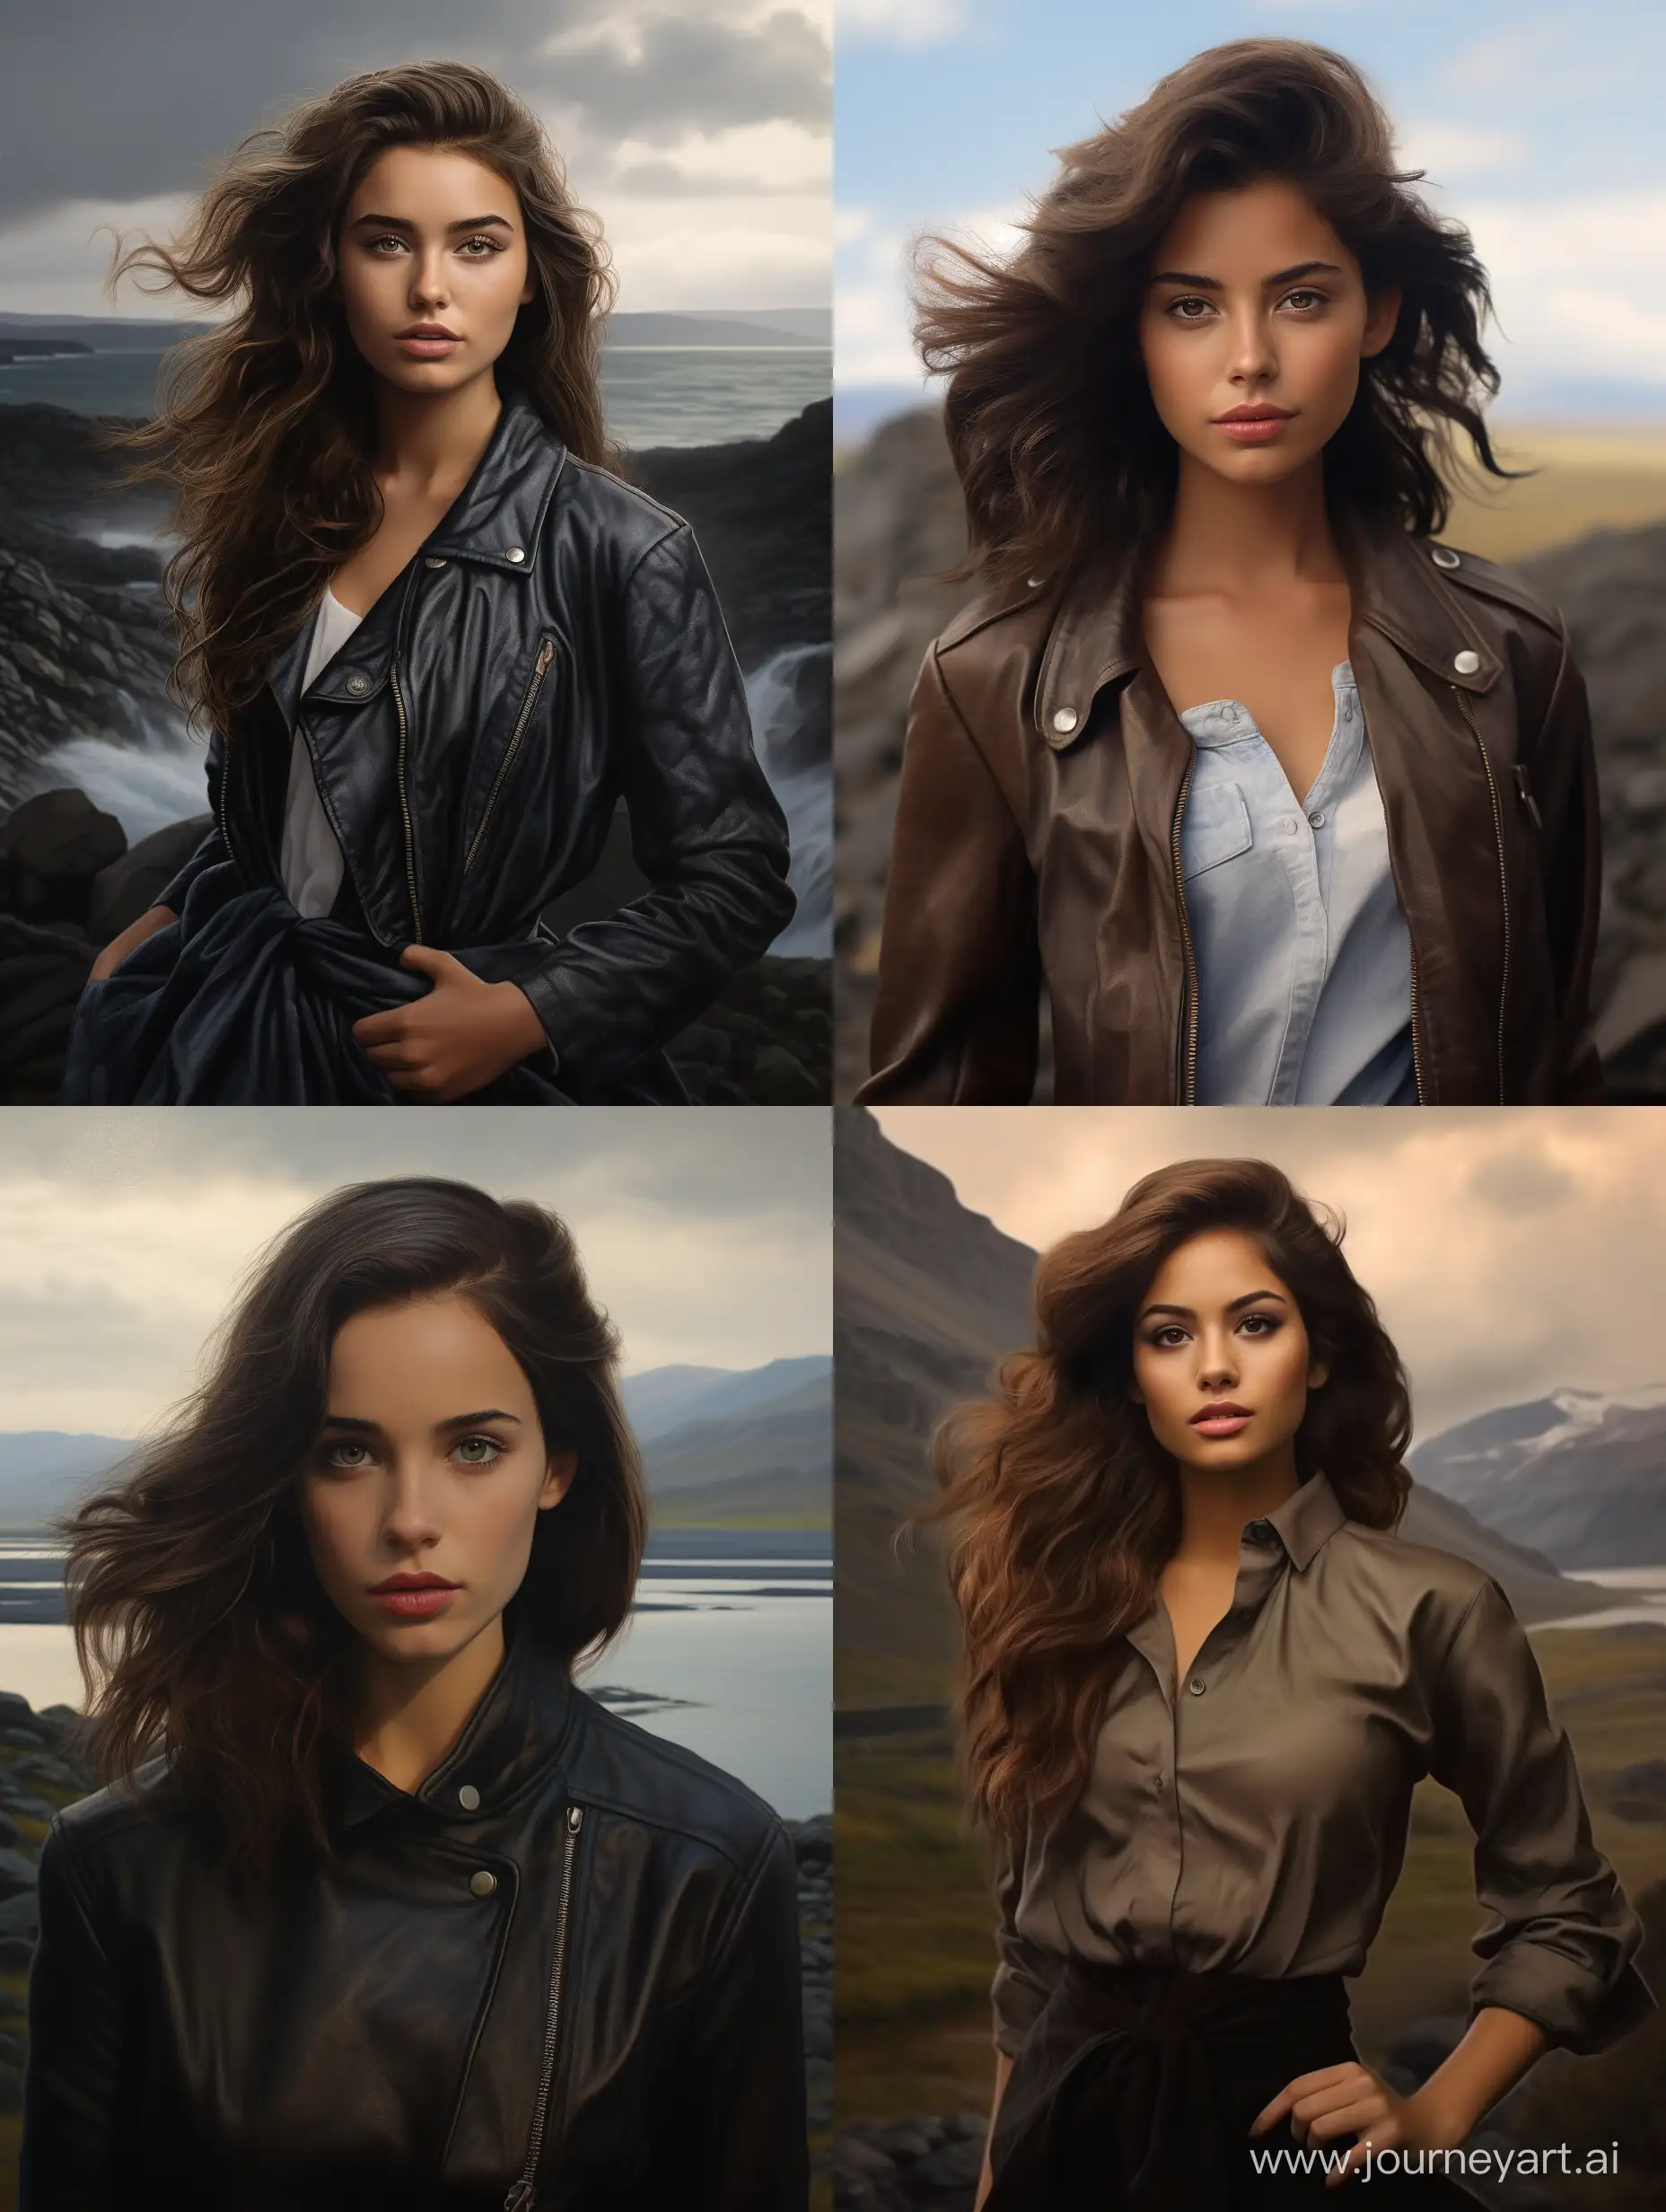 Super realistic brunette girl portrait in stylists clothes on Iceland